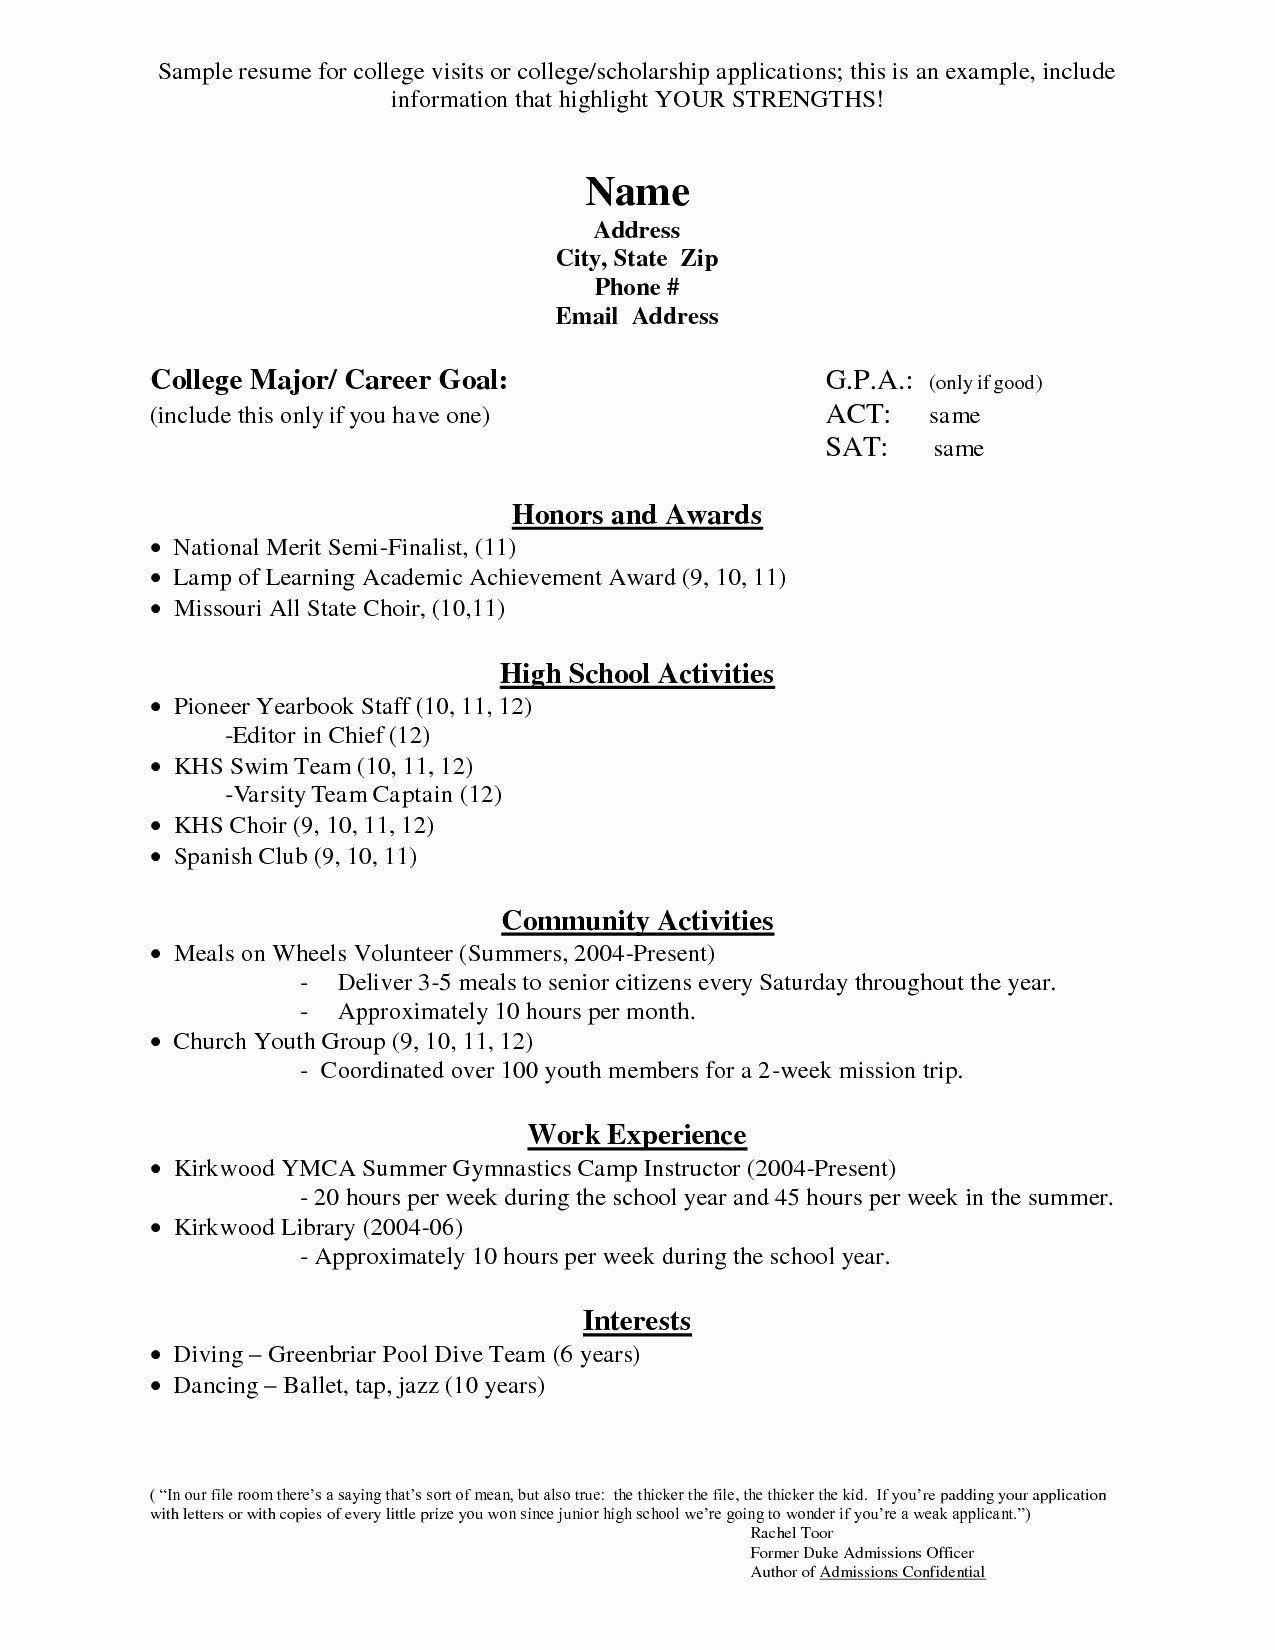 Sample Resume for High School Student Applying to College Computer Science Student Resume No Experience 010 Template Ideas …